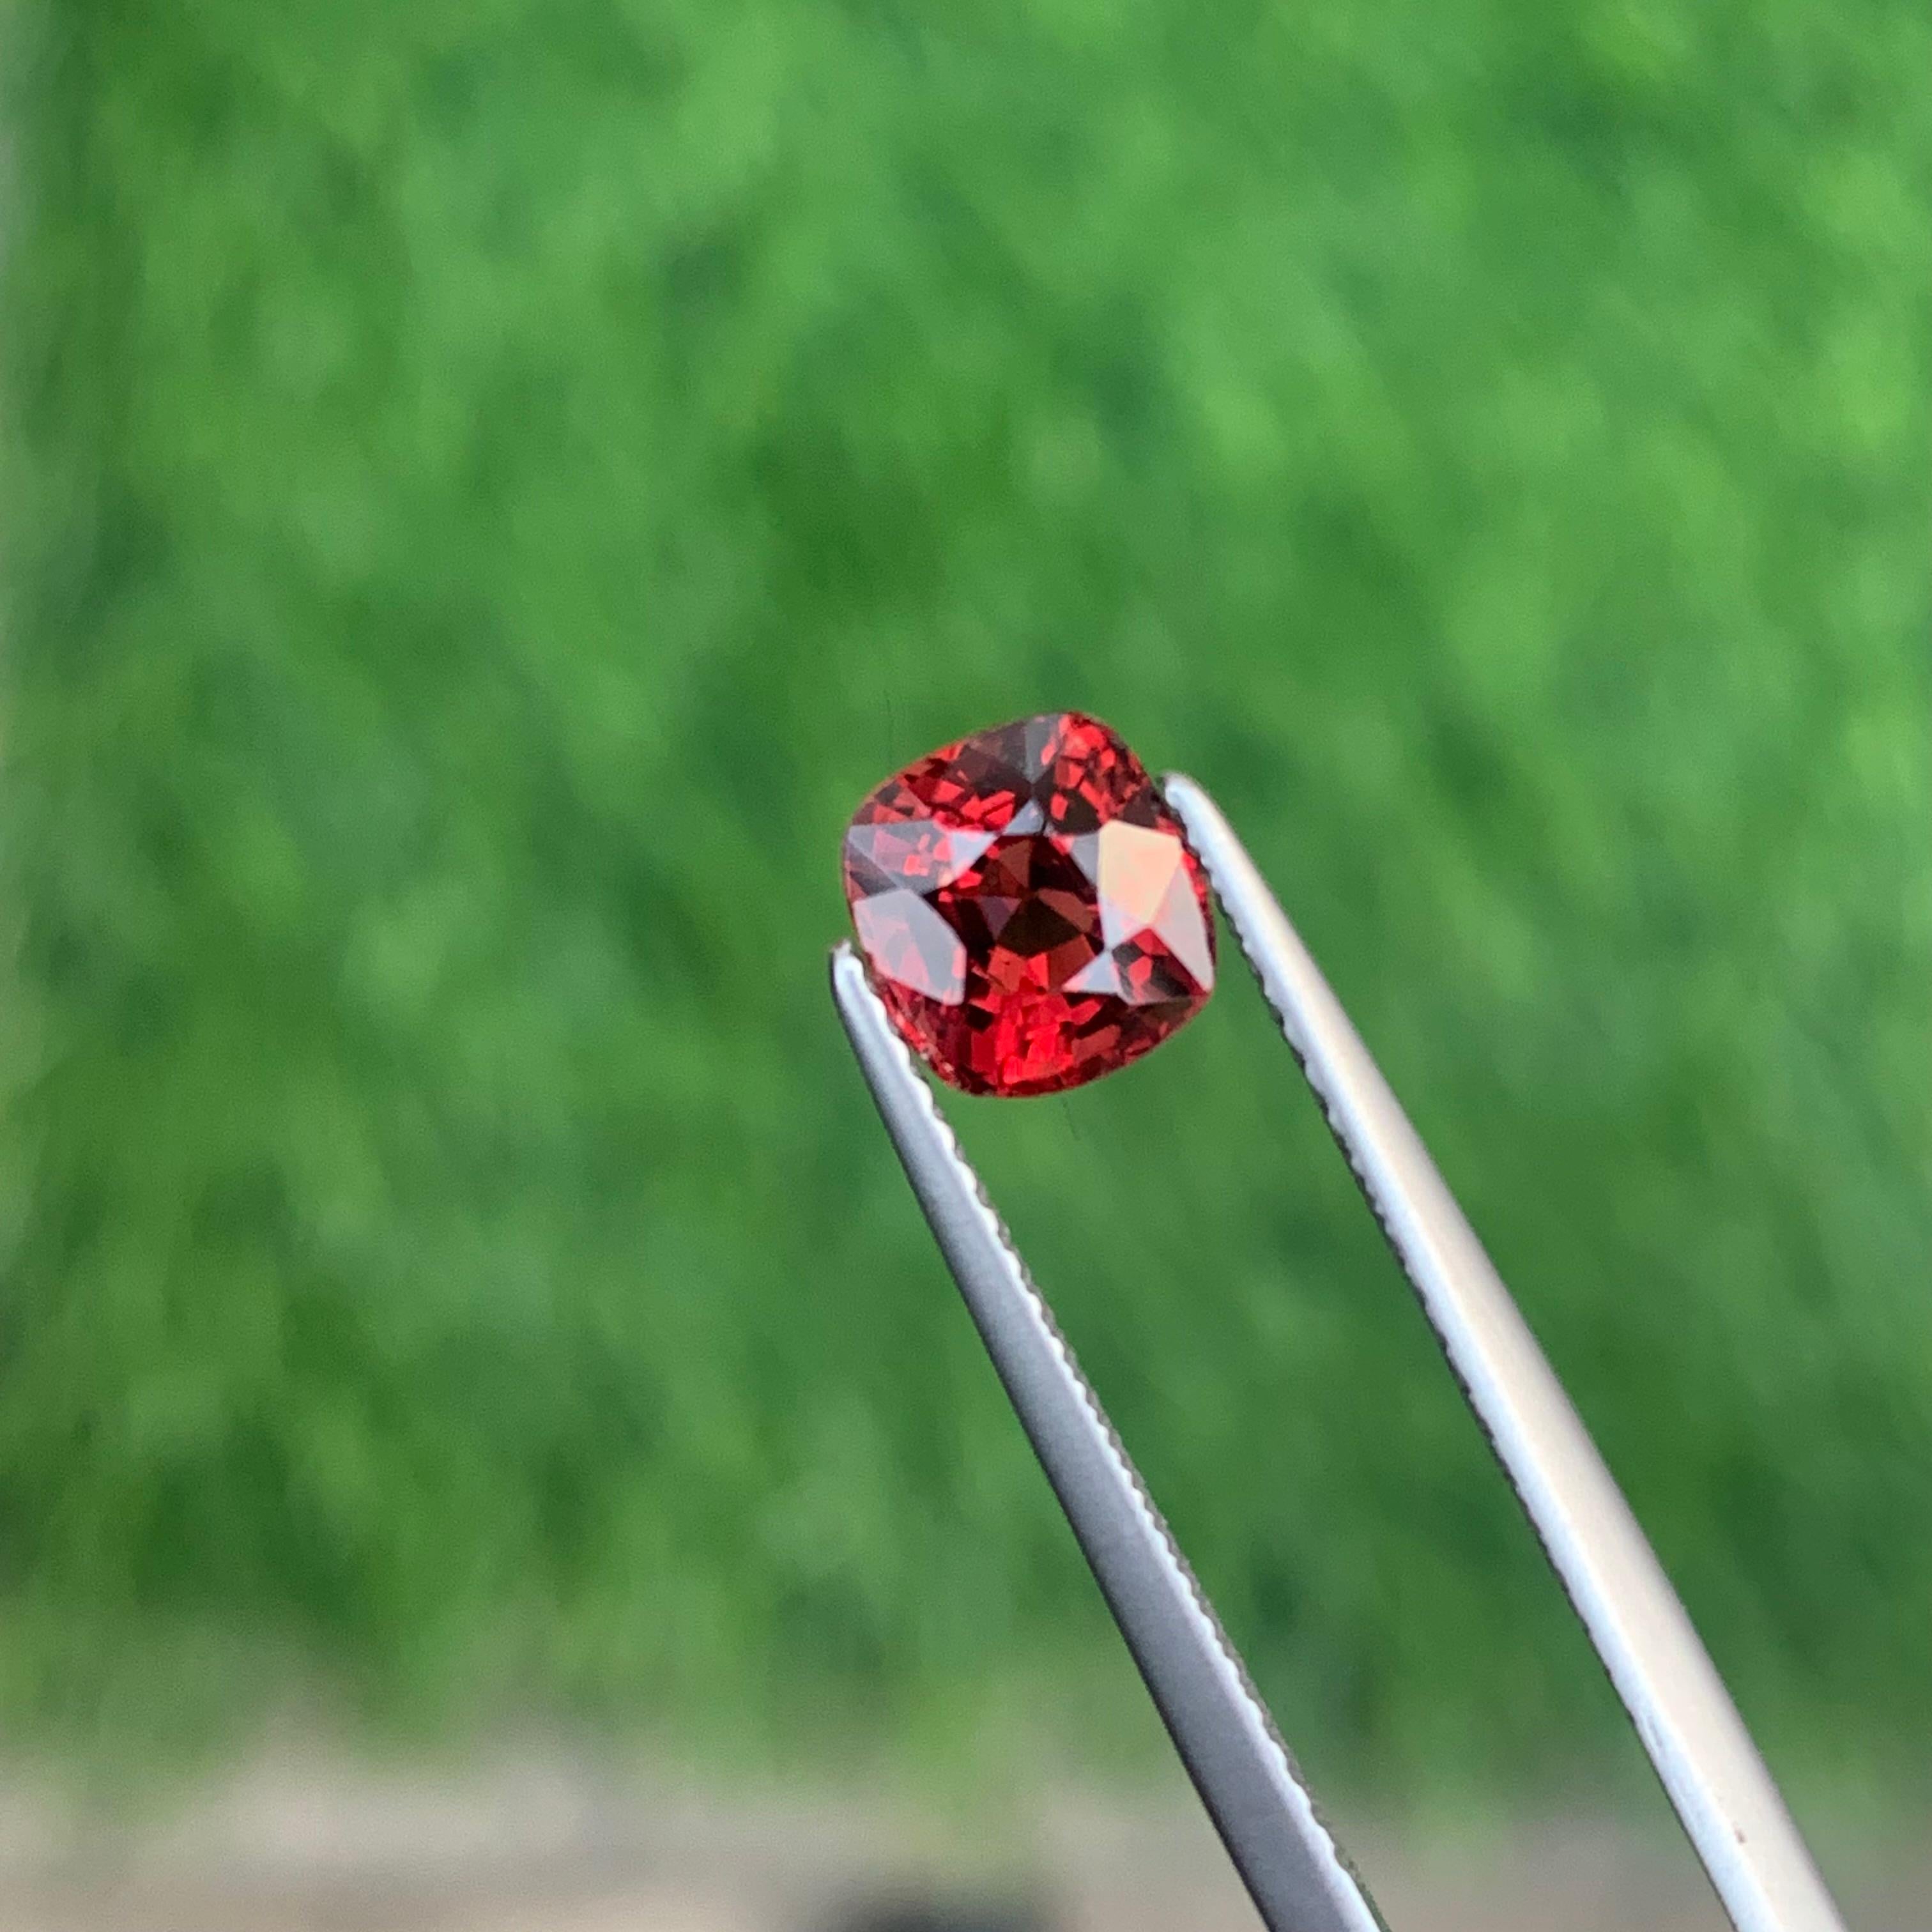 GGI Certified 1.05 Carat Faceted Red Spinel From Myanmar, Loose Burmese Spinel For Sale 1